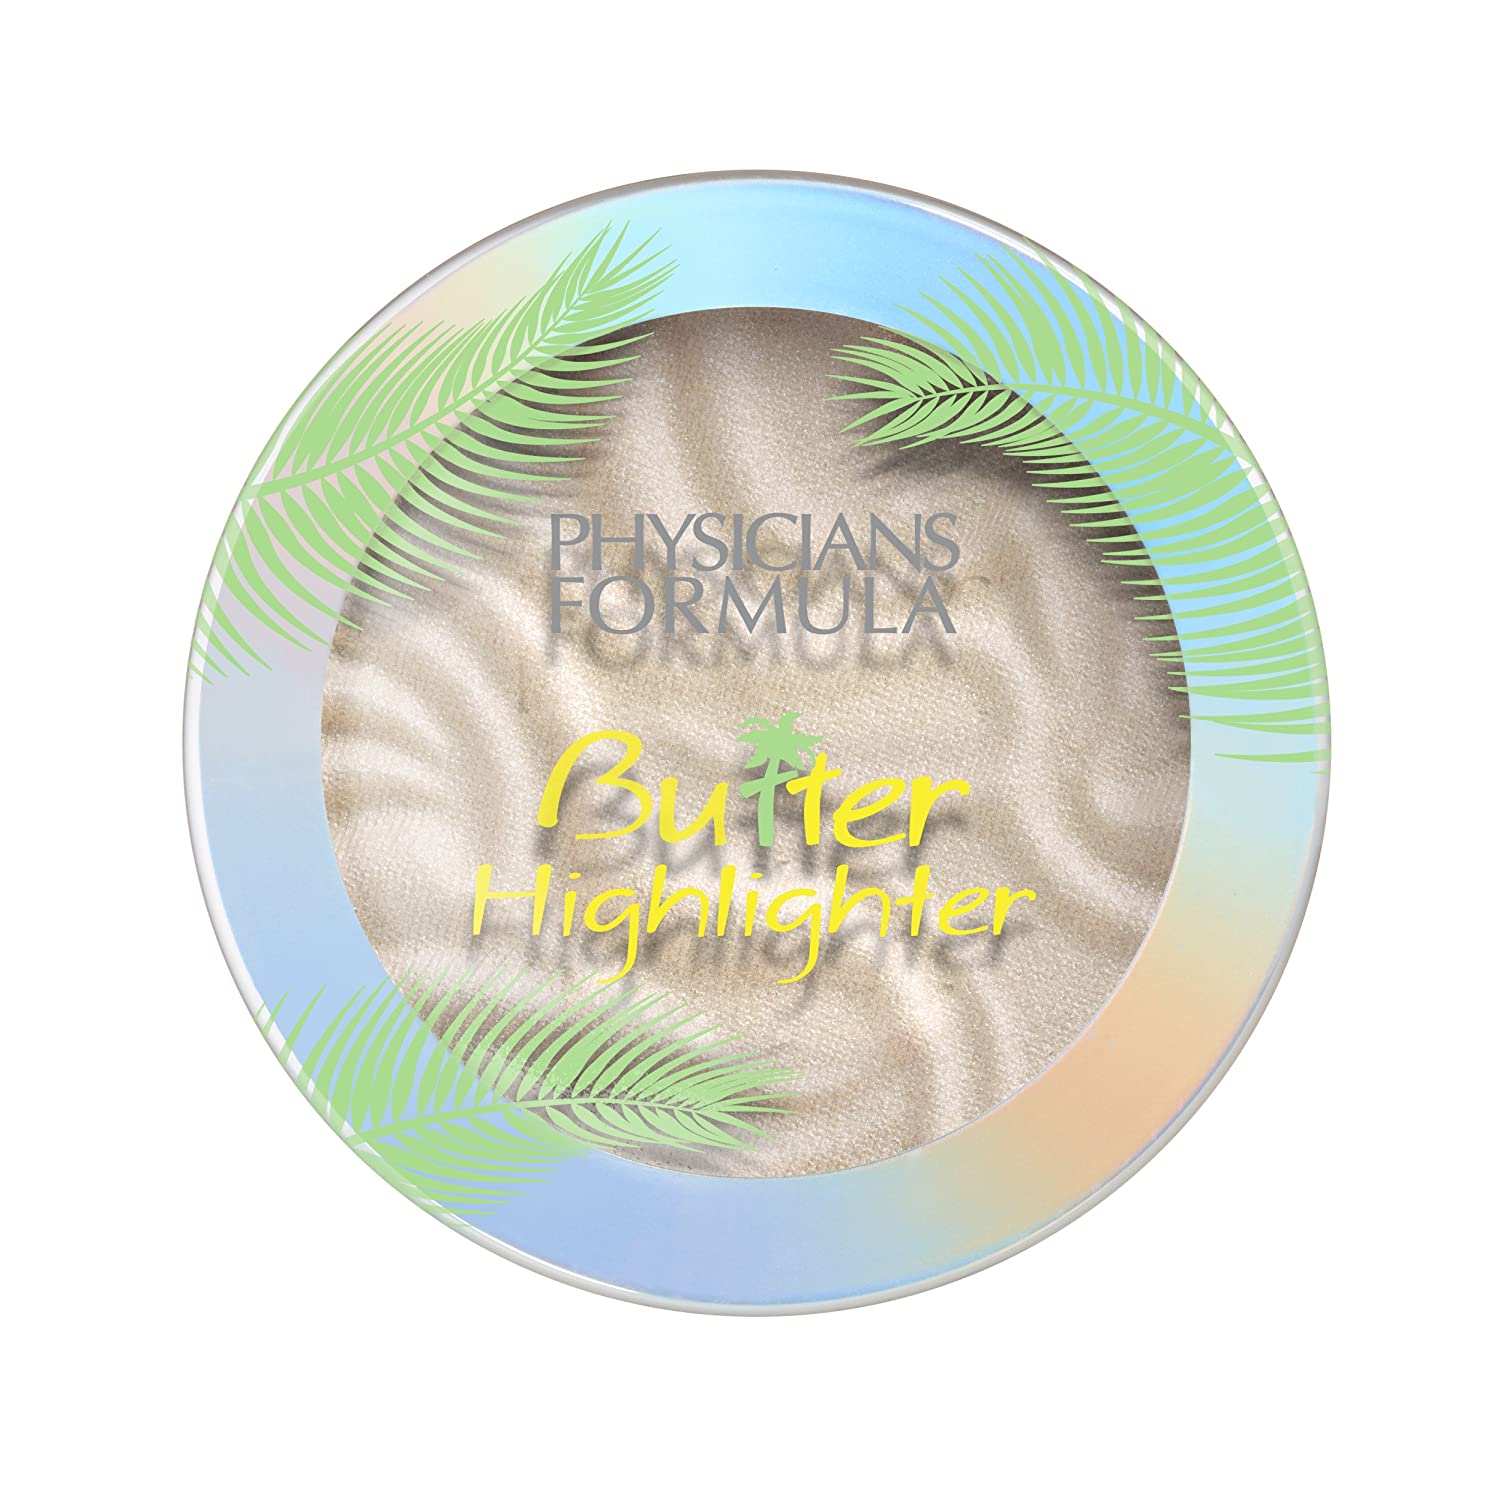 Champagne Butter Highlighter; Physicians Formula